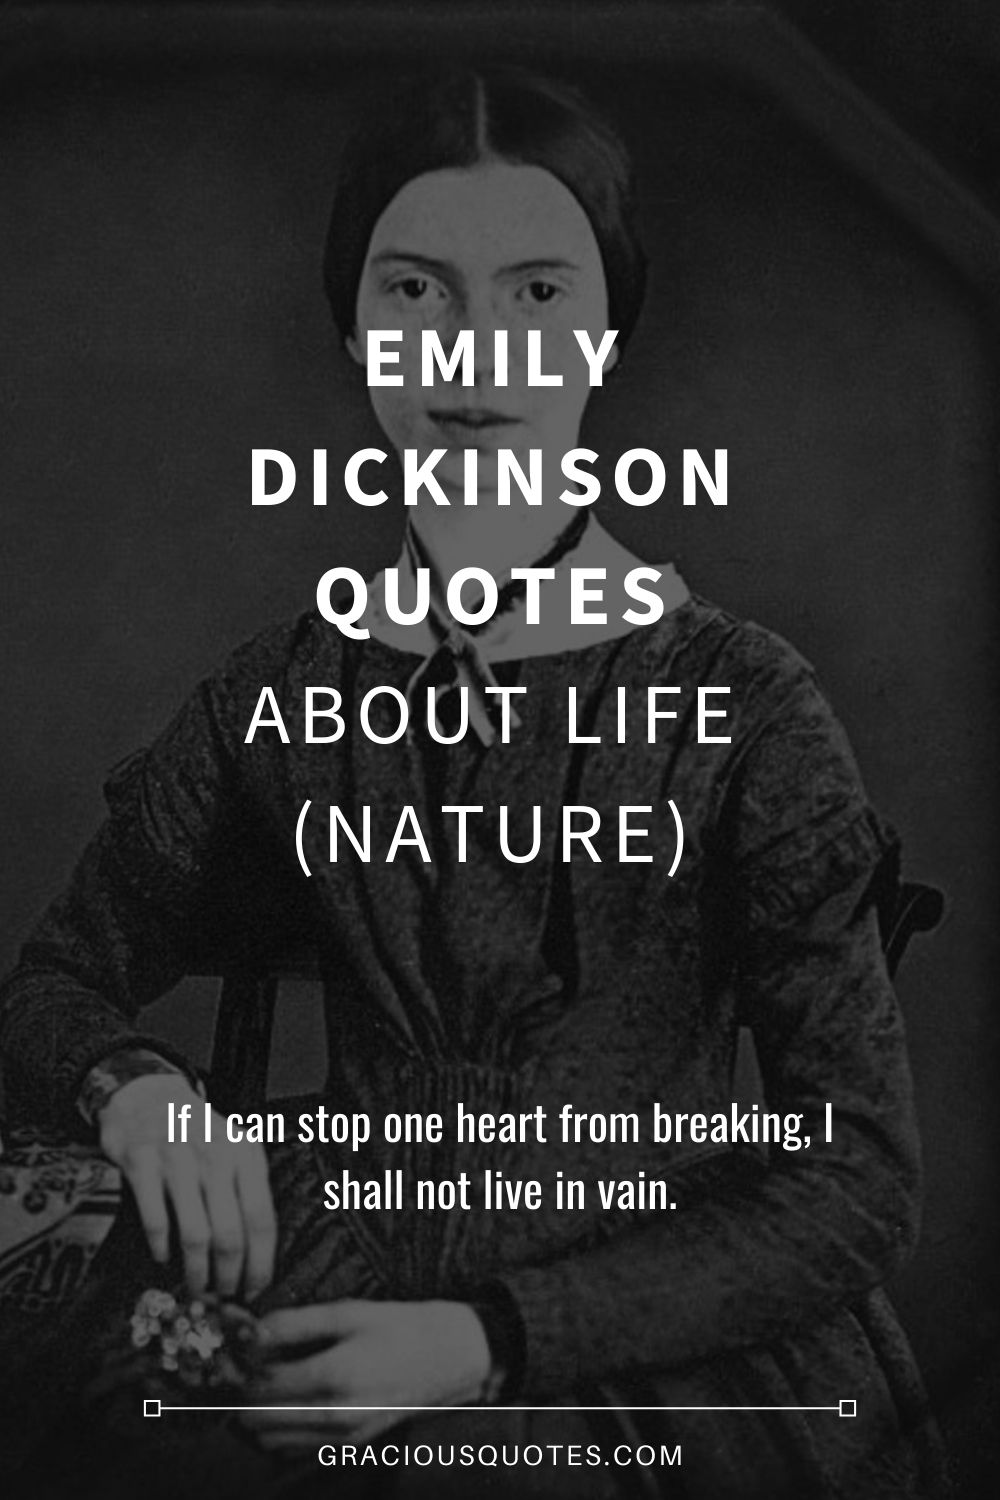 Emily Dickinson Quotes About Life (NATURE) - Gracious Quotes